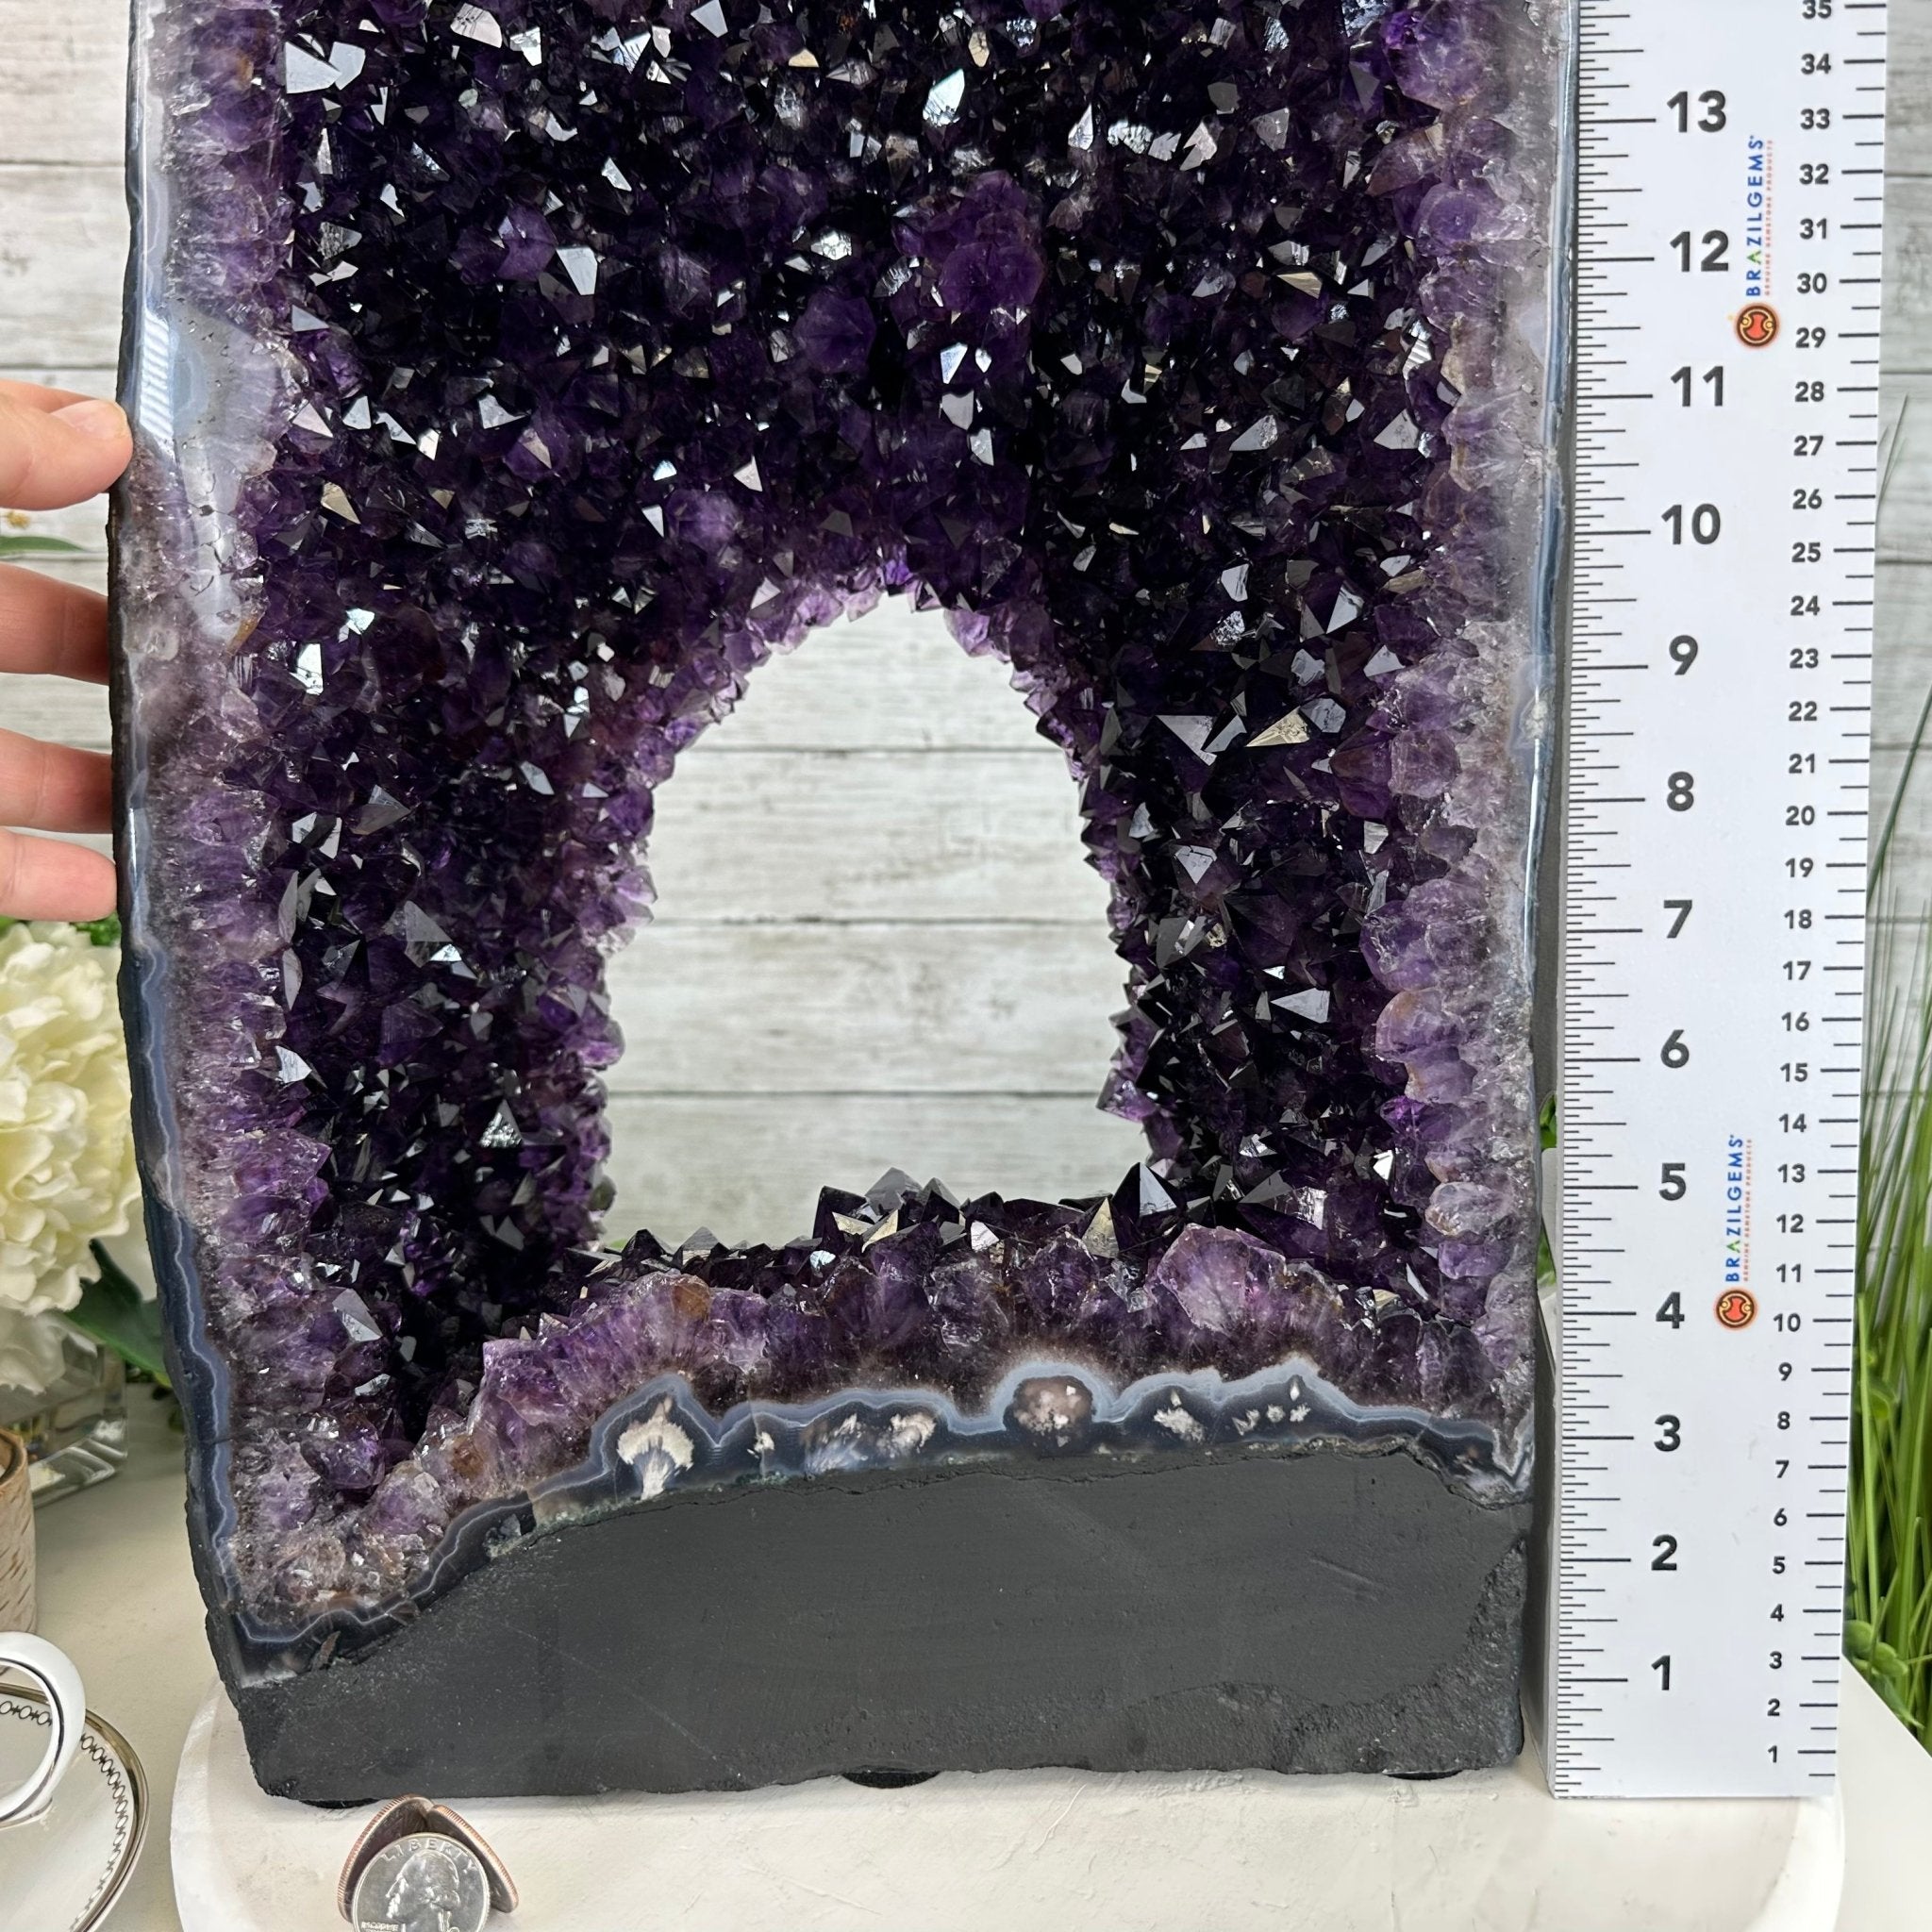 Super Quality Open 2-Sided Brazilian Amethyst Cathedral, 48.3 lbs, 23.1" tall, #5605-0090 by Brazil Gems - Brazil GemsBrazil GemsSuper Quality Open 2-Sided Brazilian Amethyst Cathedral, 48.3 lbs, 23.1" tall, #5605-0090 by Brazil GemsOpen 2-Sided Cathedrals5605-0090